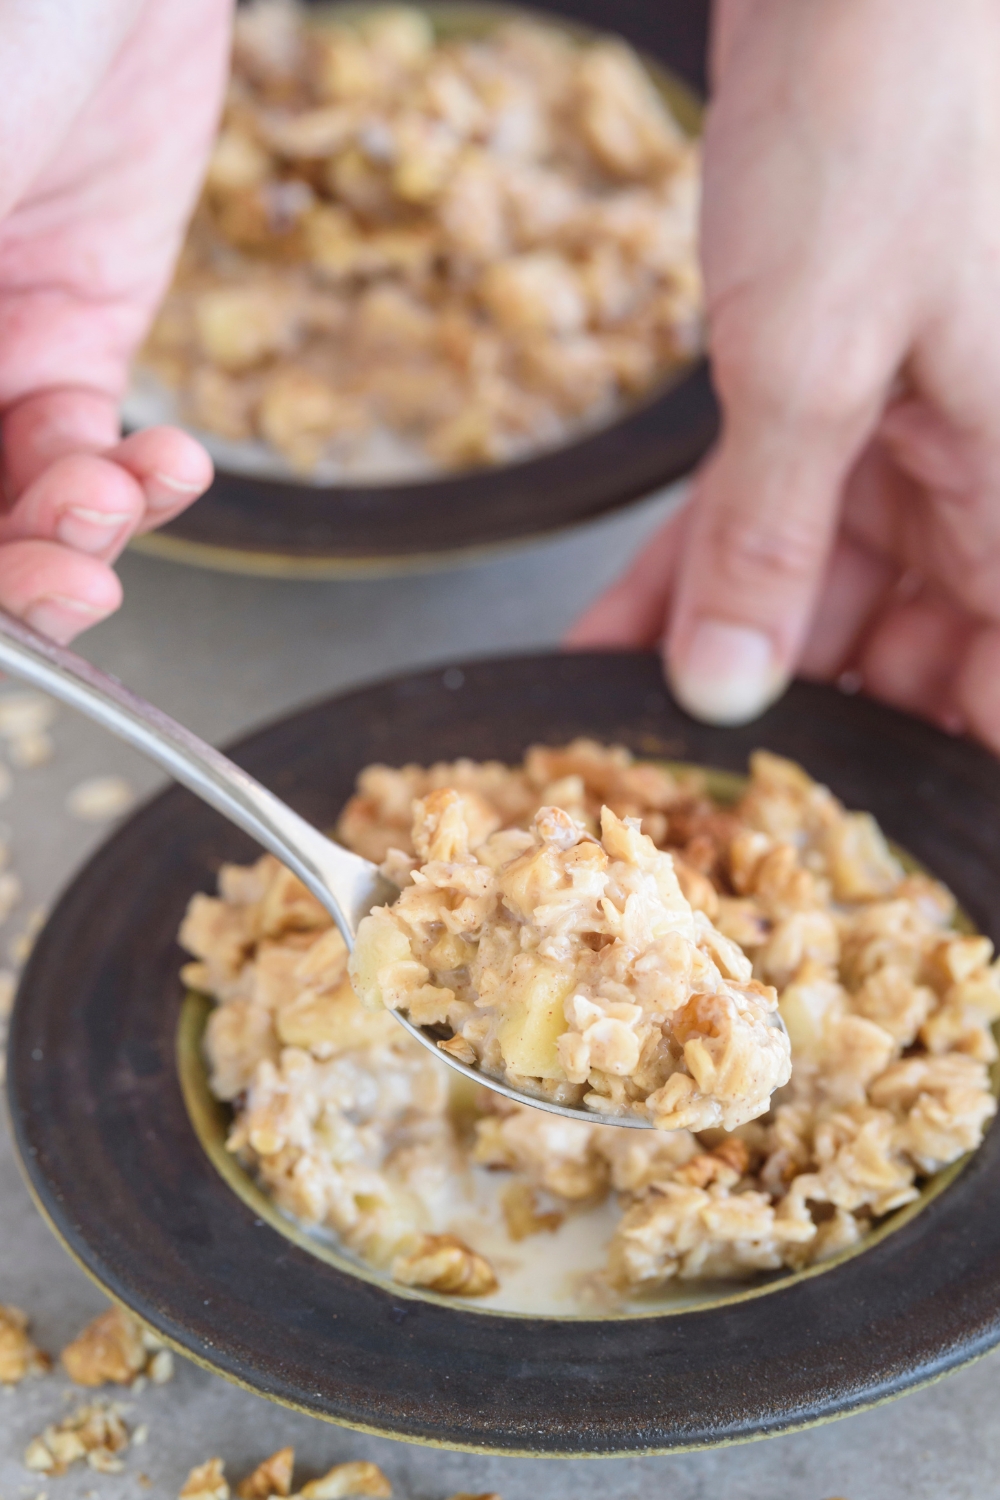 A spoonful of oatmeal with diced apples and chopped nuts mixed in. The spoon is held above a bowl filled with oatmeal.